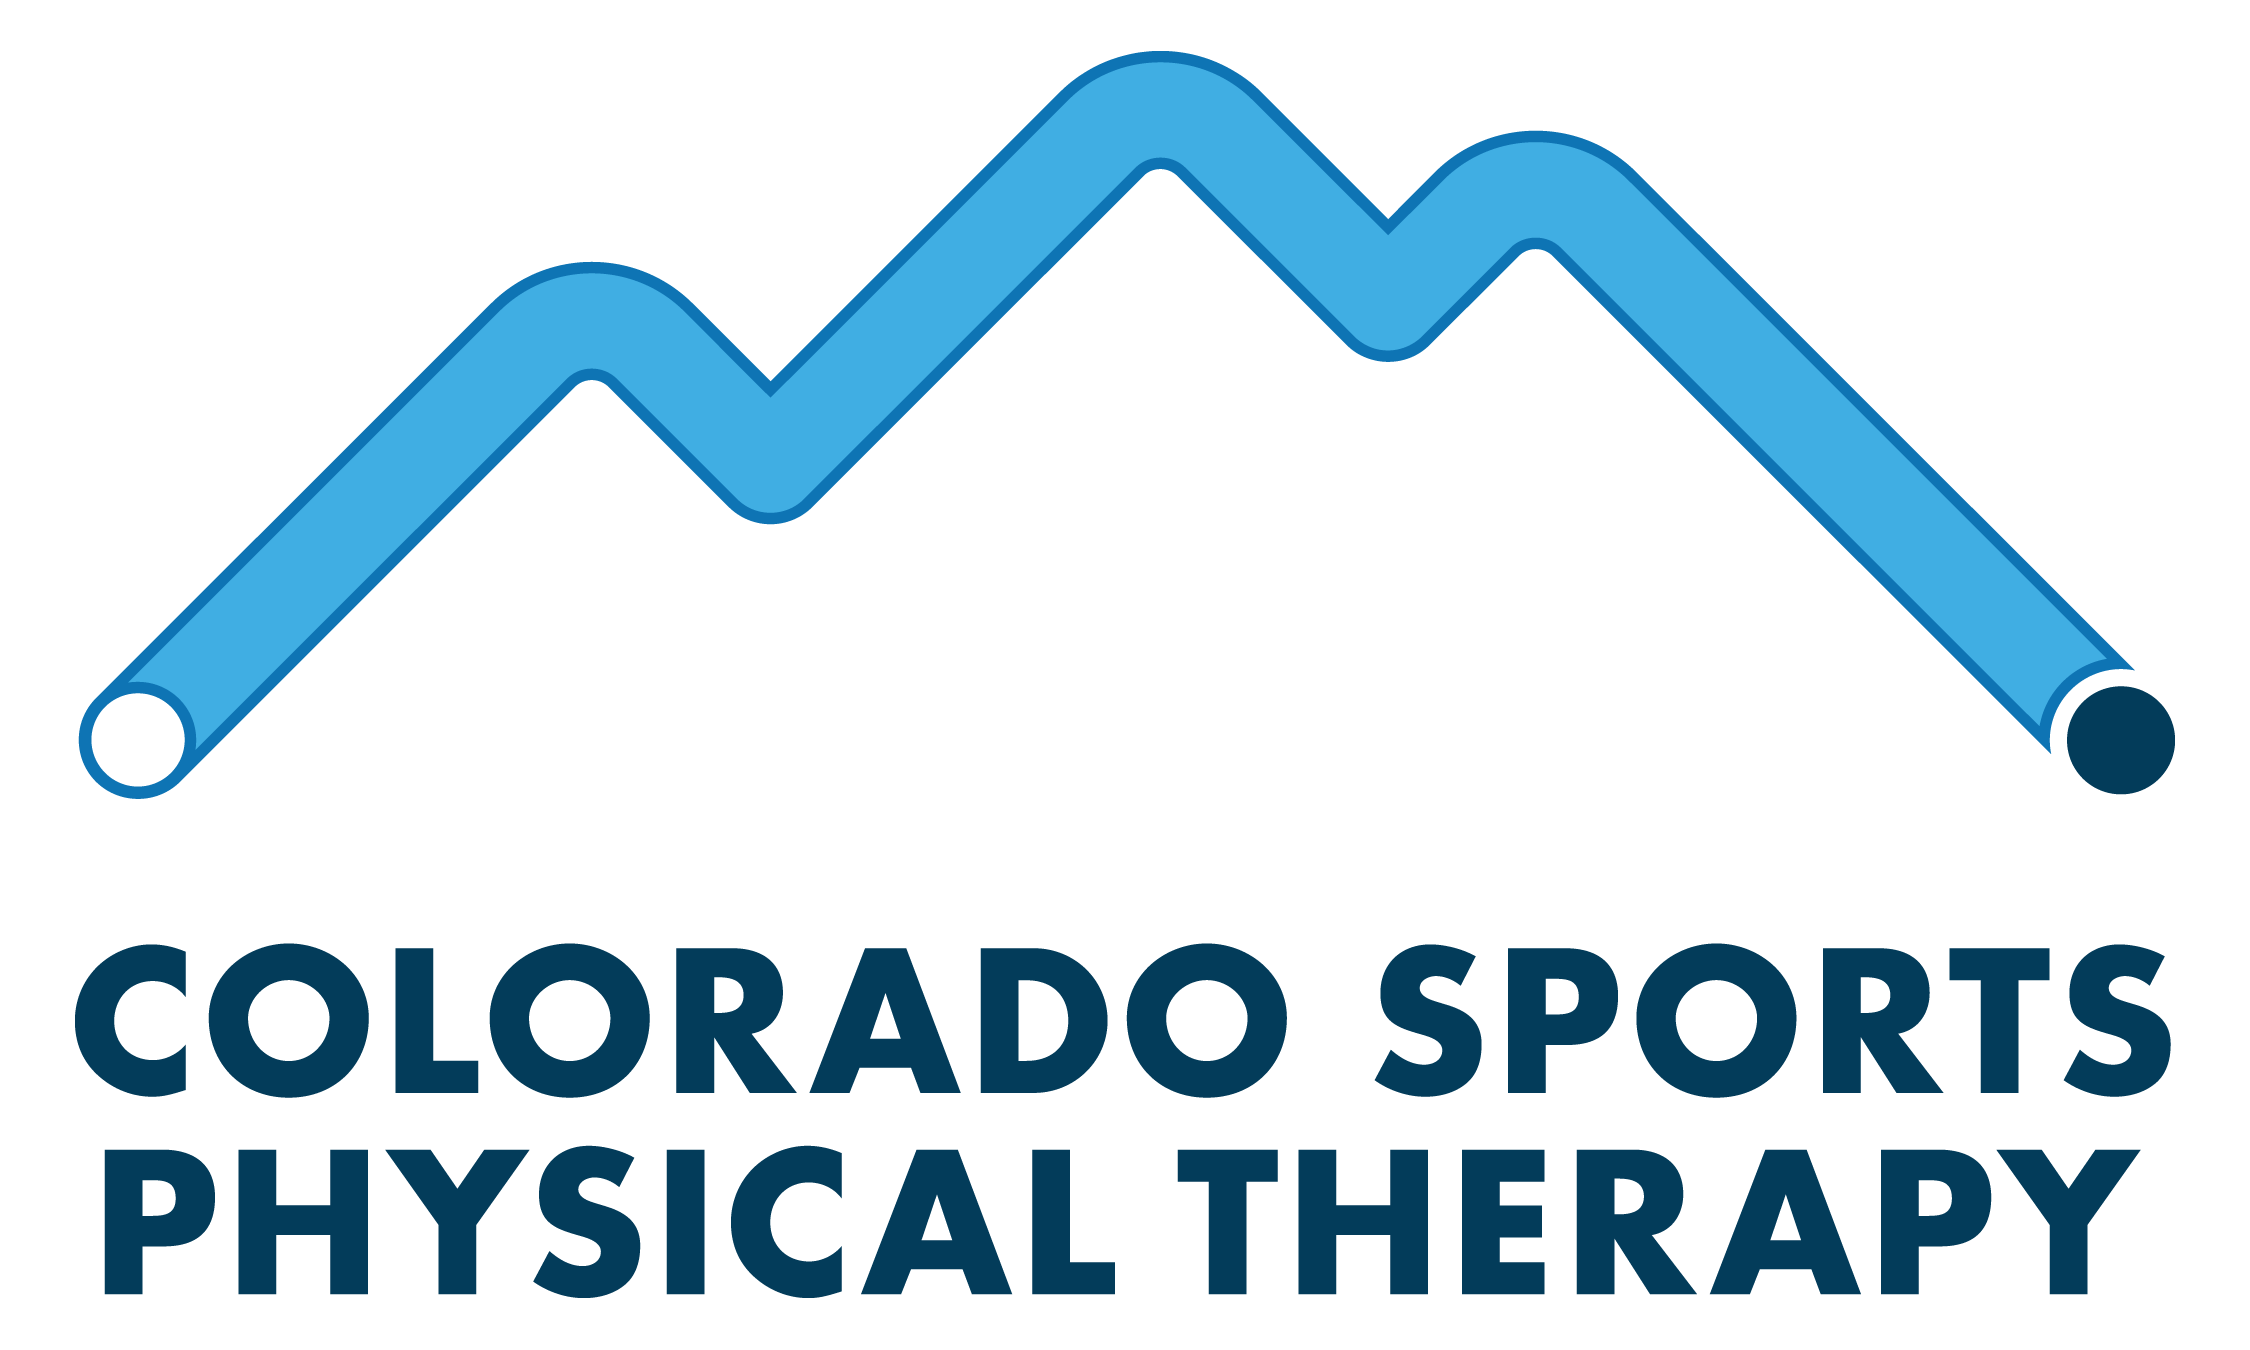 Colorado Sports Physical Therapy